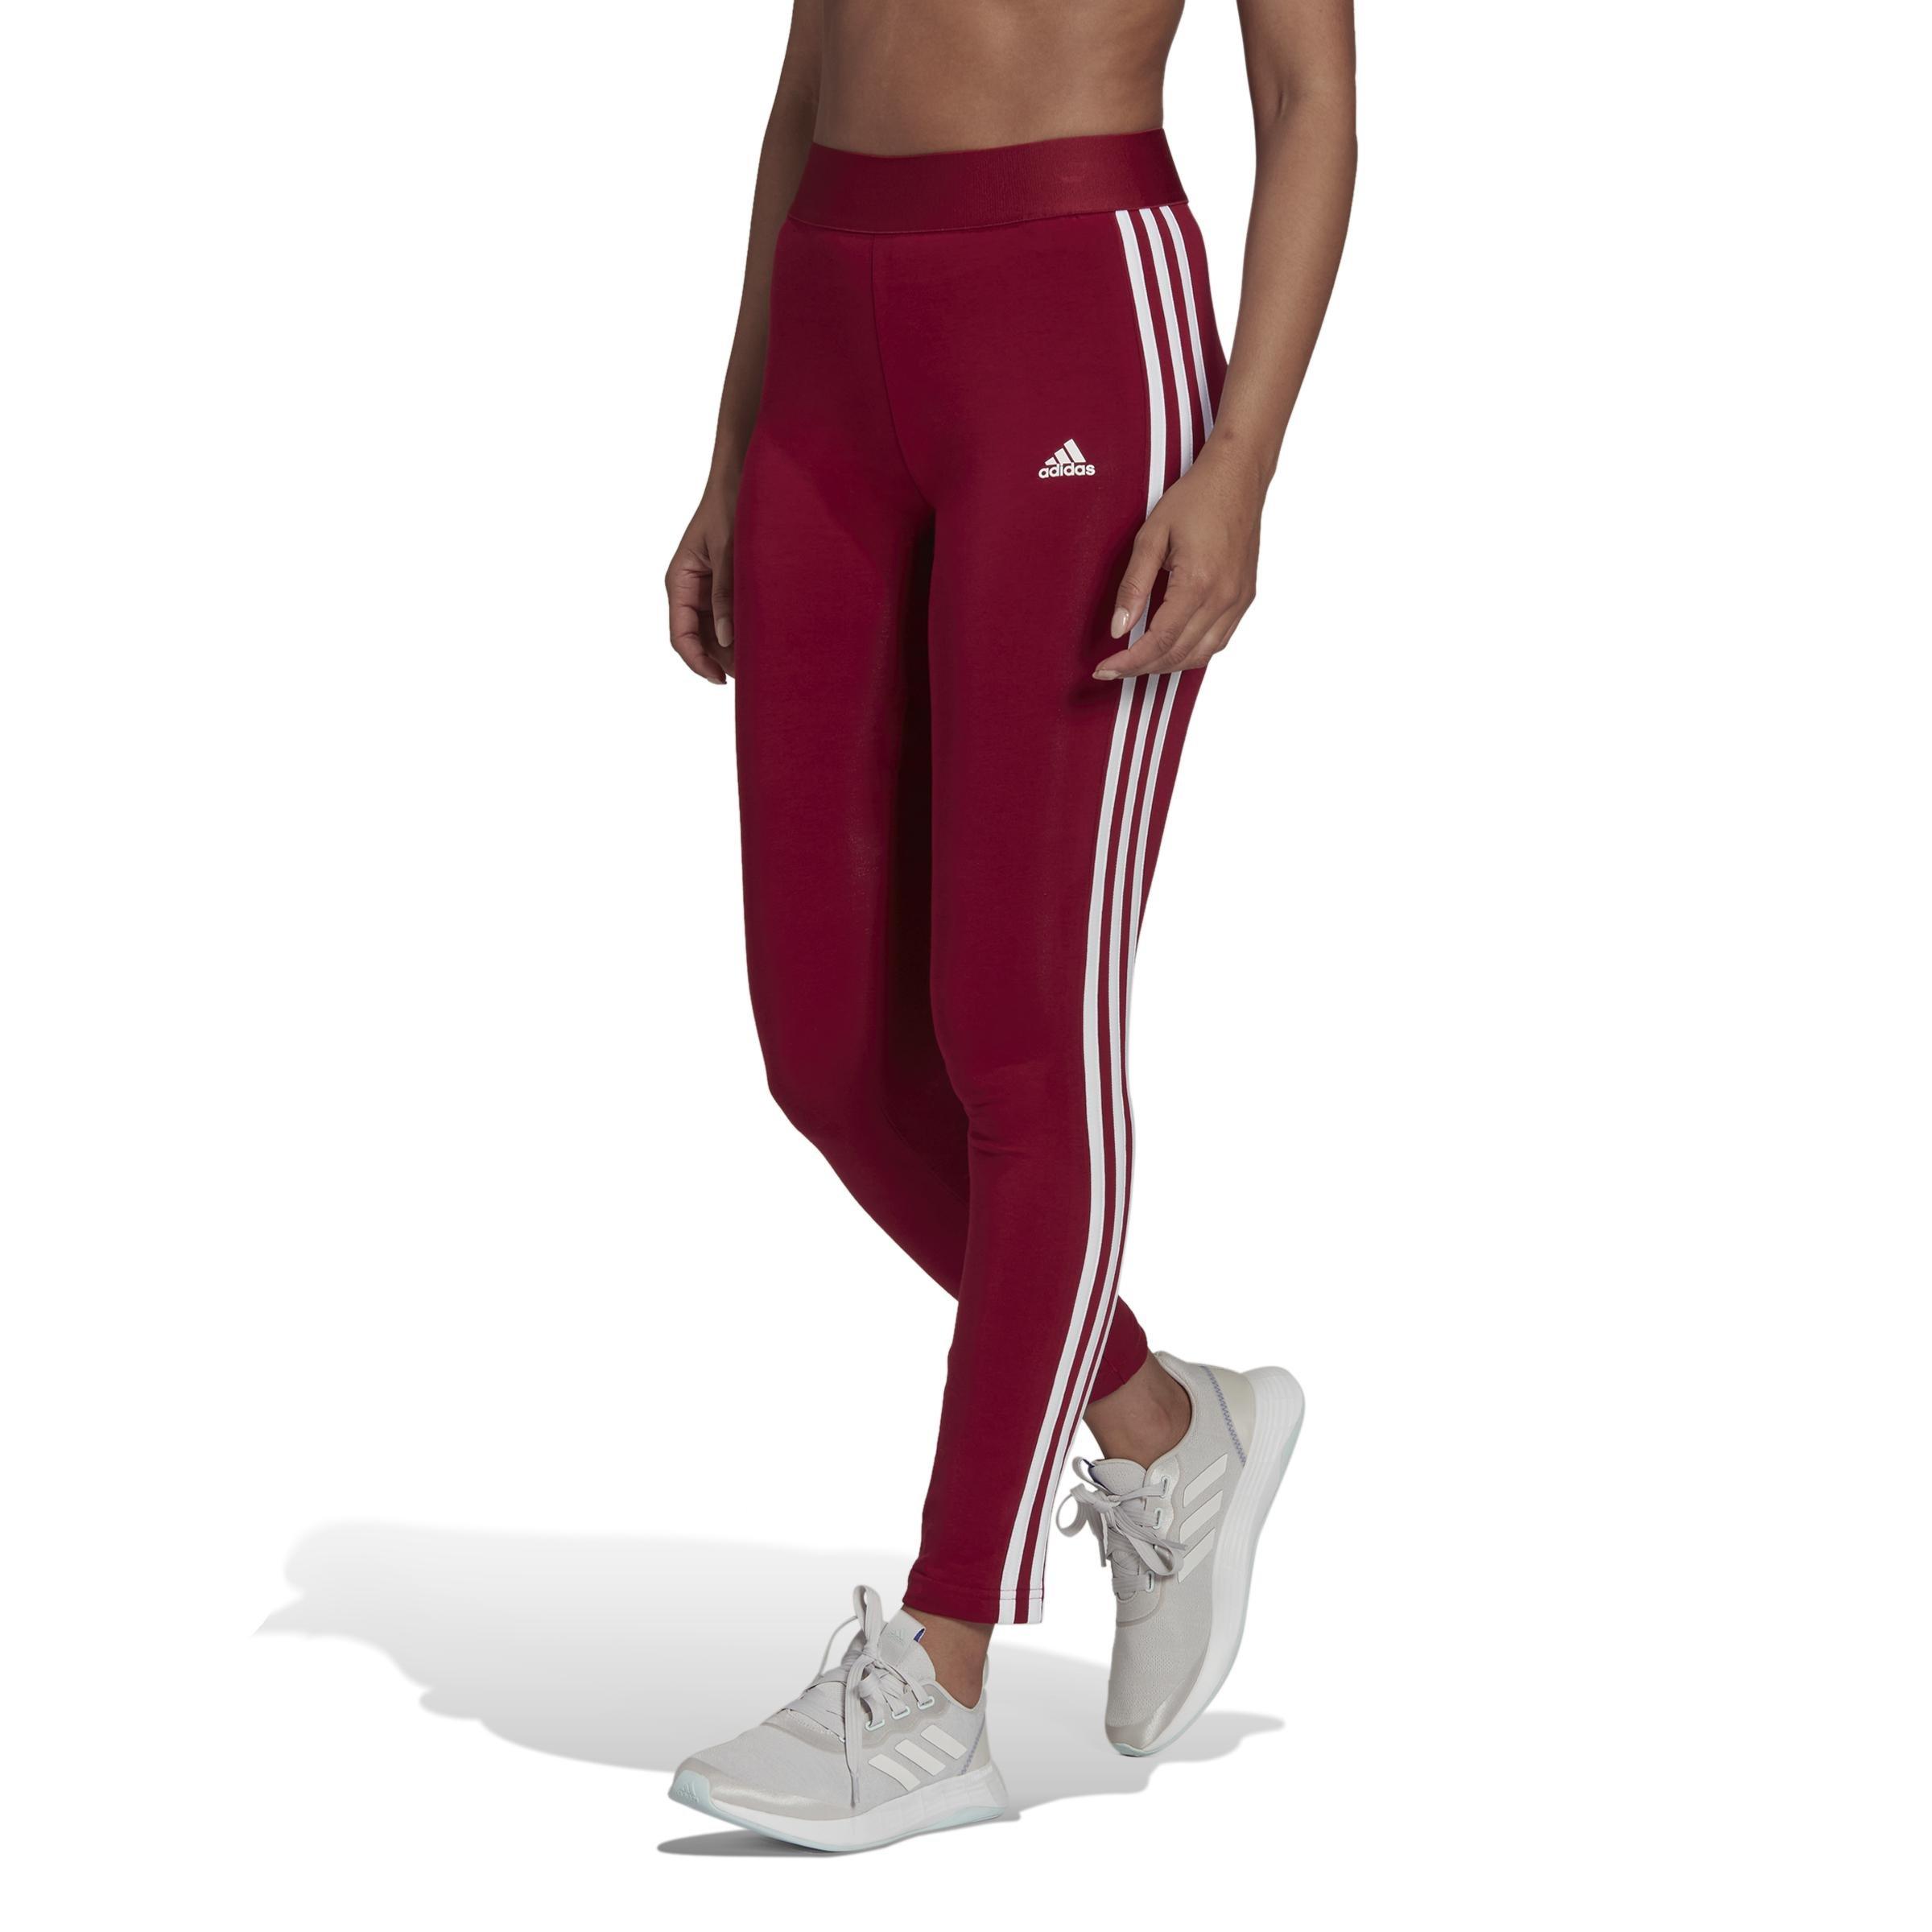 Shop Adidas Leggings & Tights For Women Online in Lebanon, 30-80% OFF